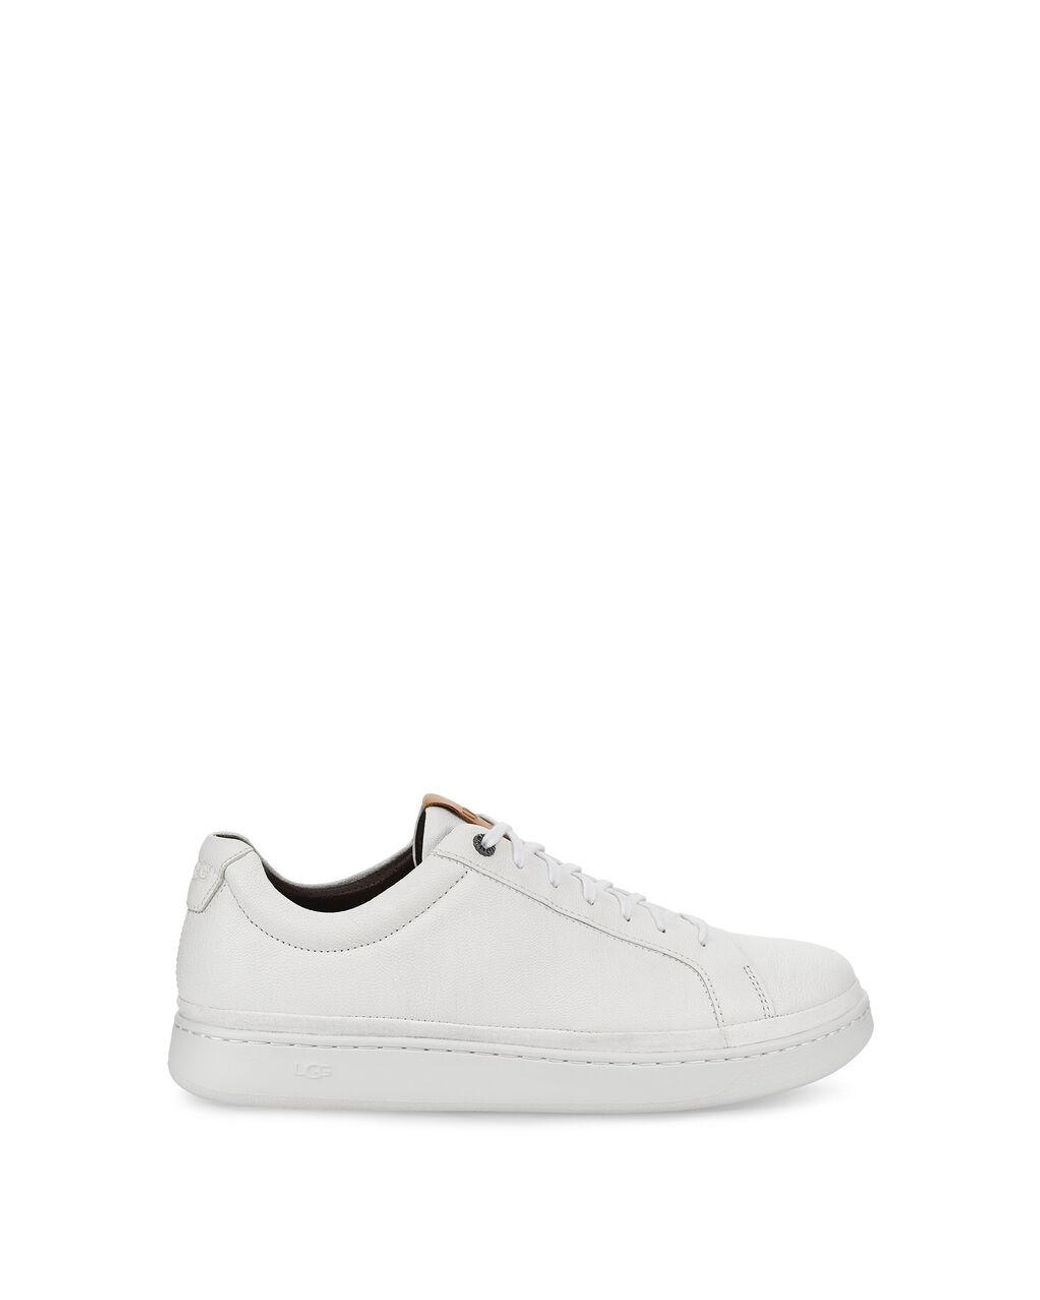 UGG Cali Sneaker Low Leather in White for Men | Lyst UK